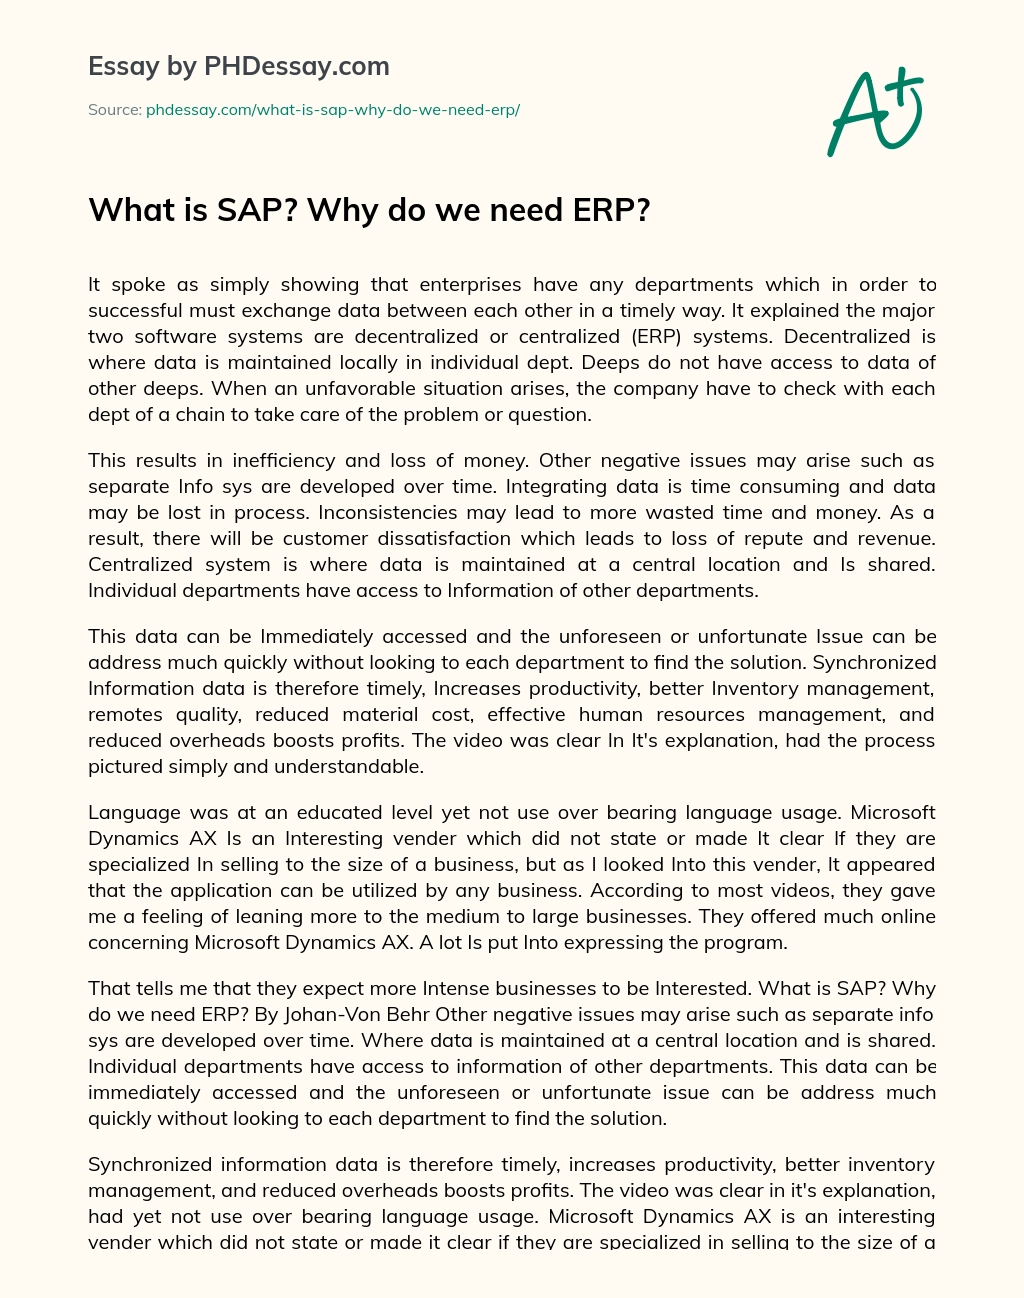 What is SAP? Why do we need ERP? essay